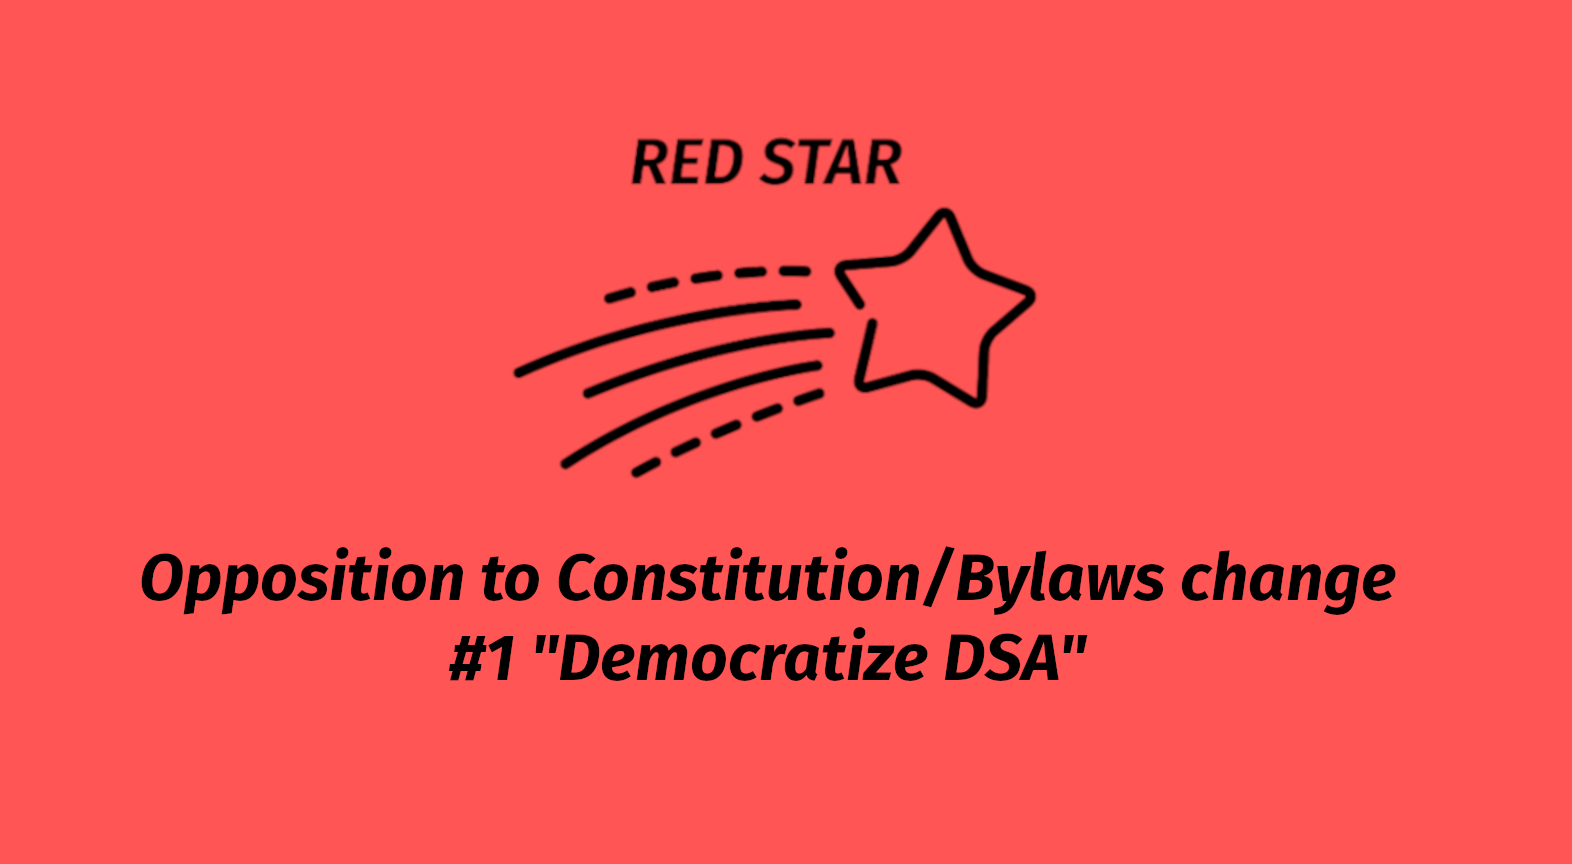 Red Star Opposition to Constitution / Bylaws Change #1: “Democratize DSA”